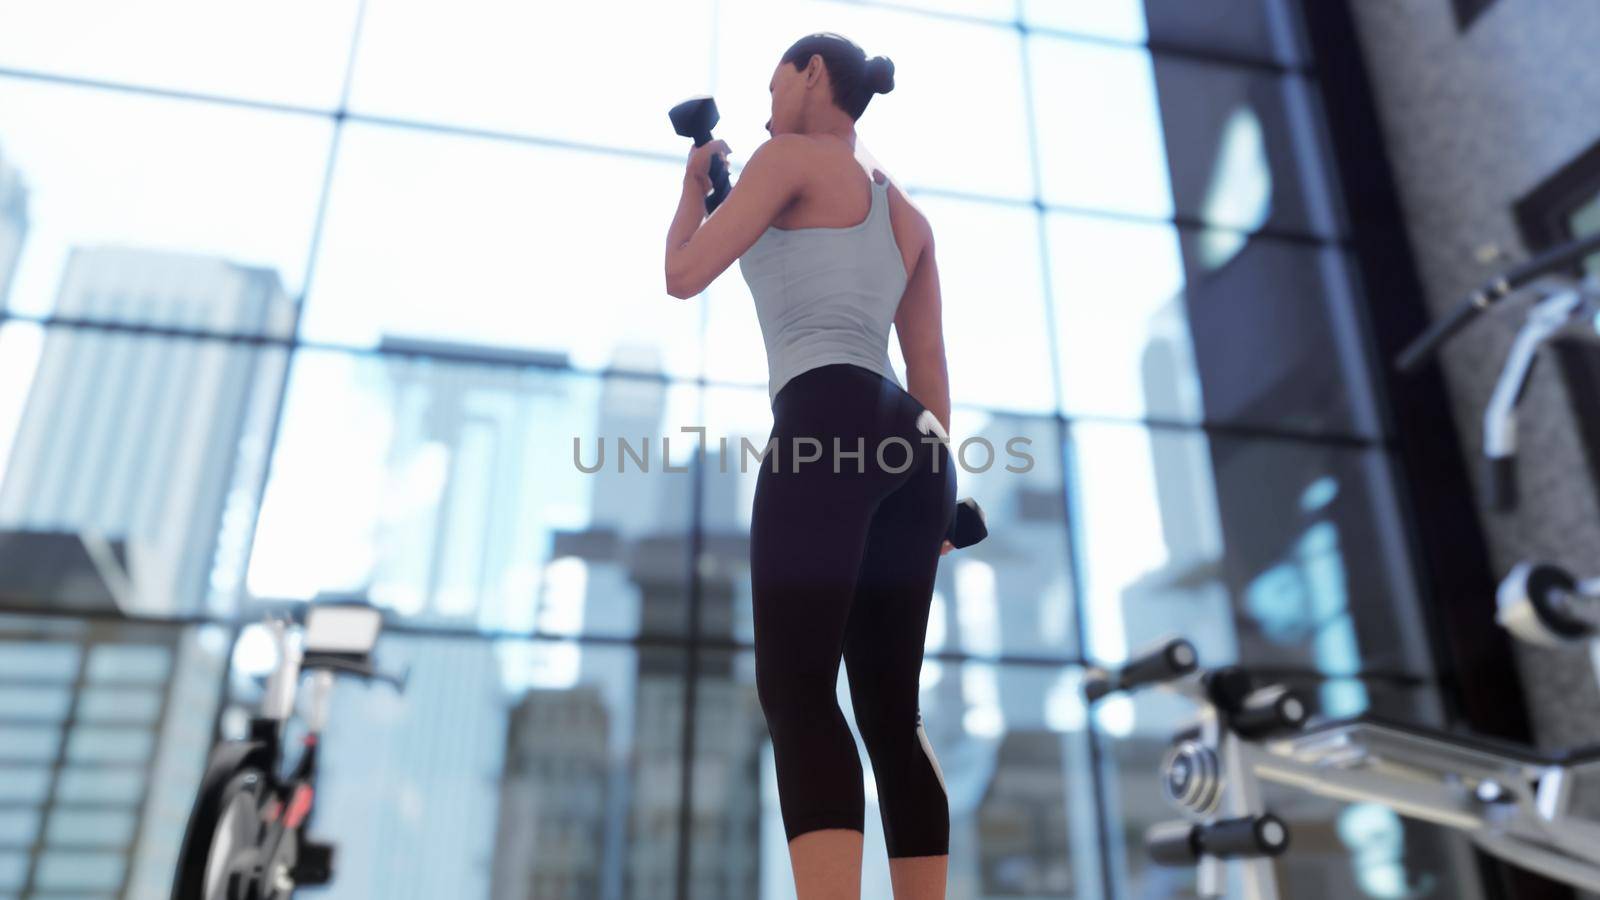 Gym with a variety of exercise equipment and a sportswoman doing sports